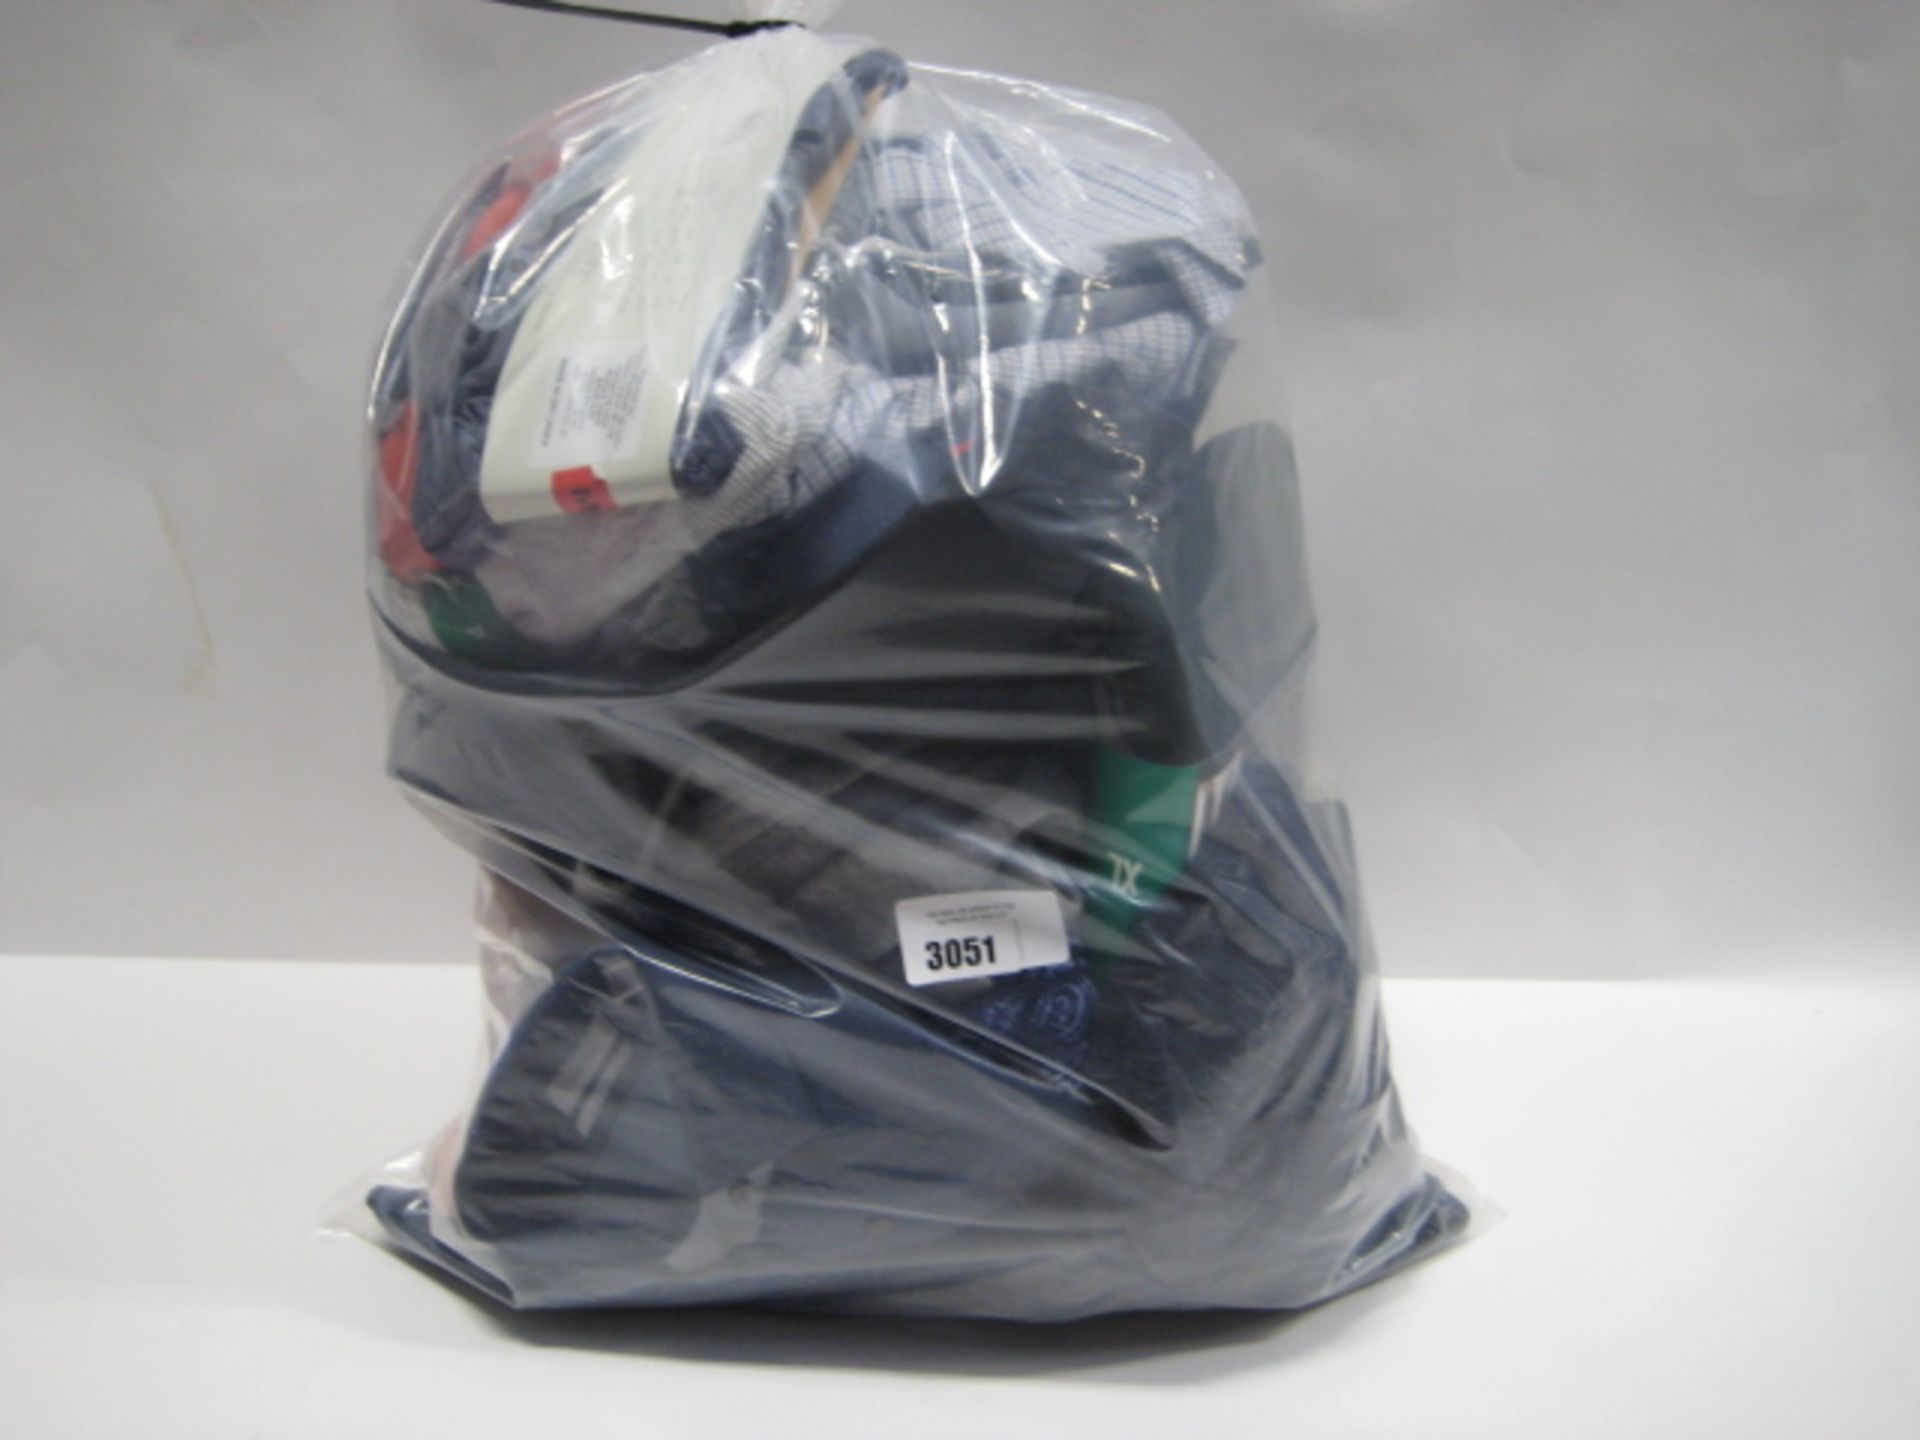 Bag of ladies and gents clothing to incl. loungewear, leggings, jogging bottoms, shirts, etc. - Image 2 of 2